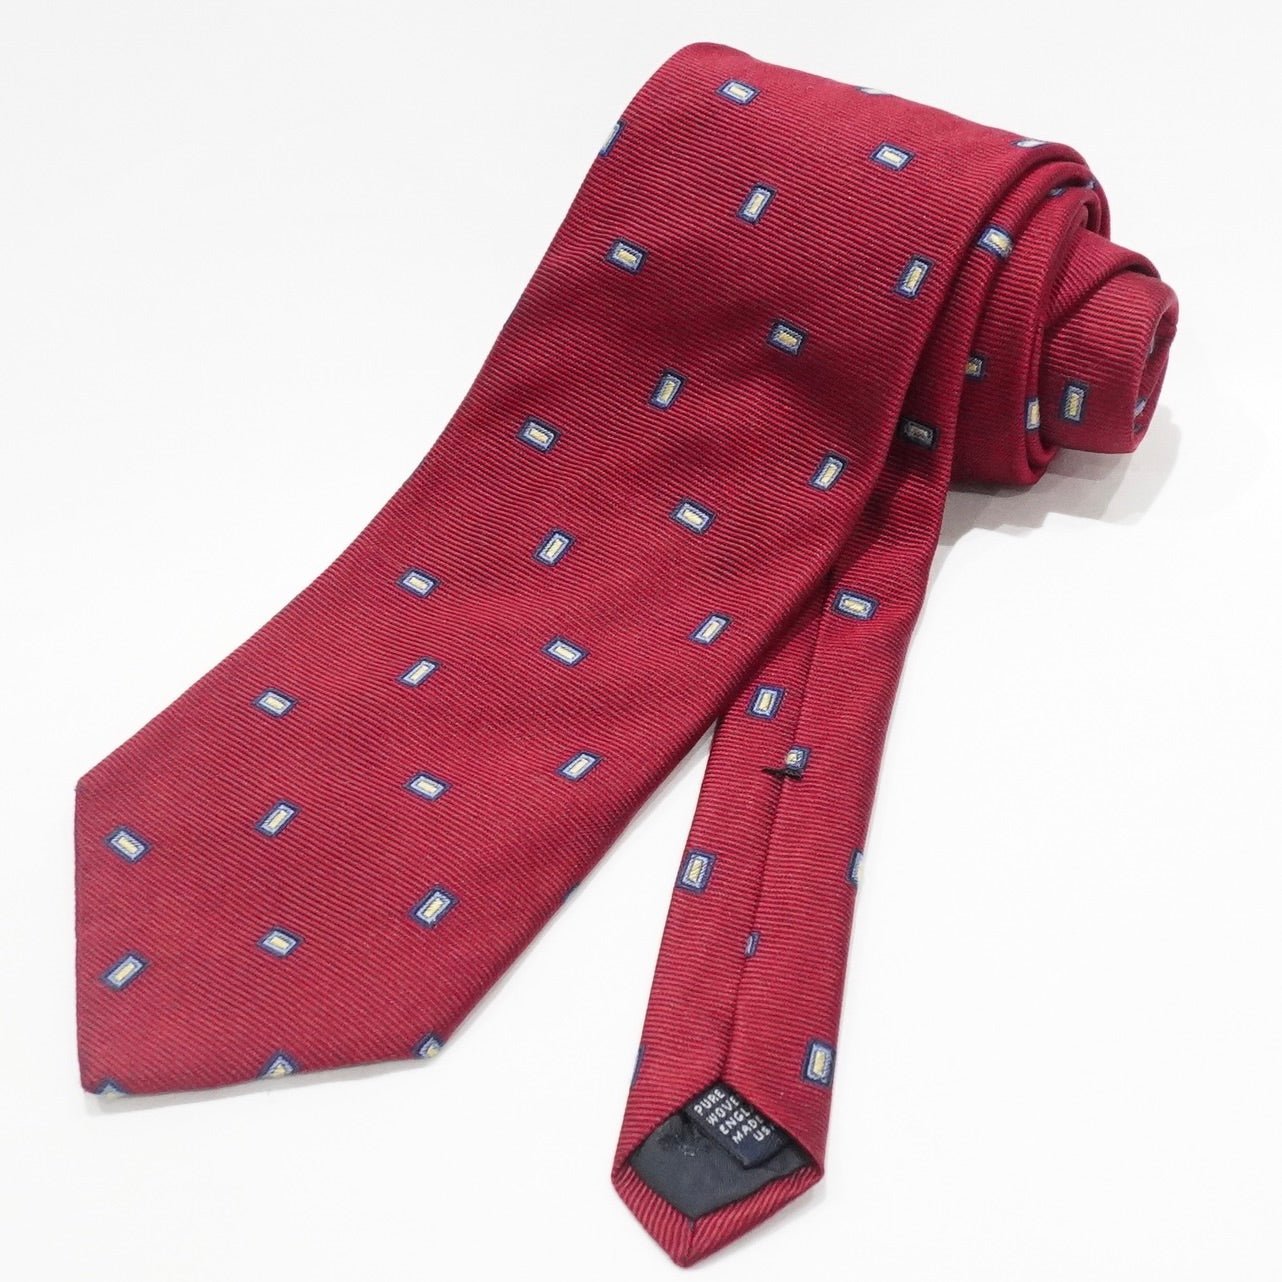 [BROOKS BROTHERS] OLD SMALL CREST TIE RED ネクタイ - #shop_name #アパルティール# #名古屋# #セレクトショップ#